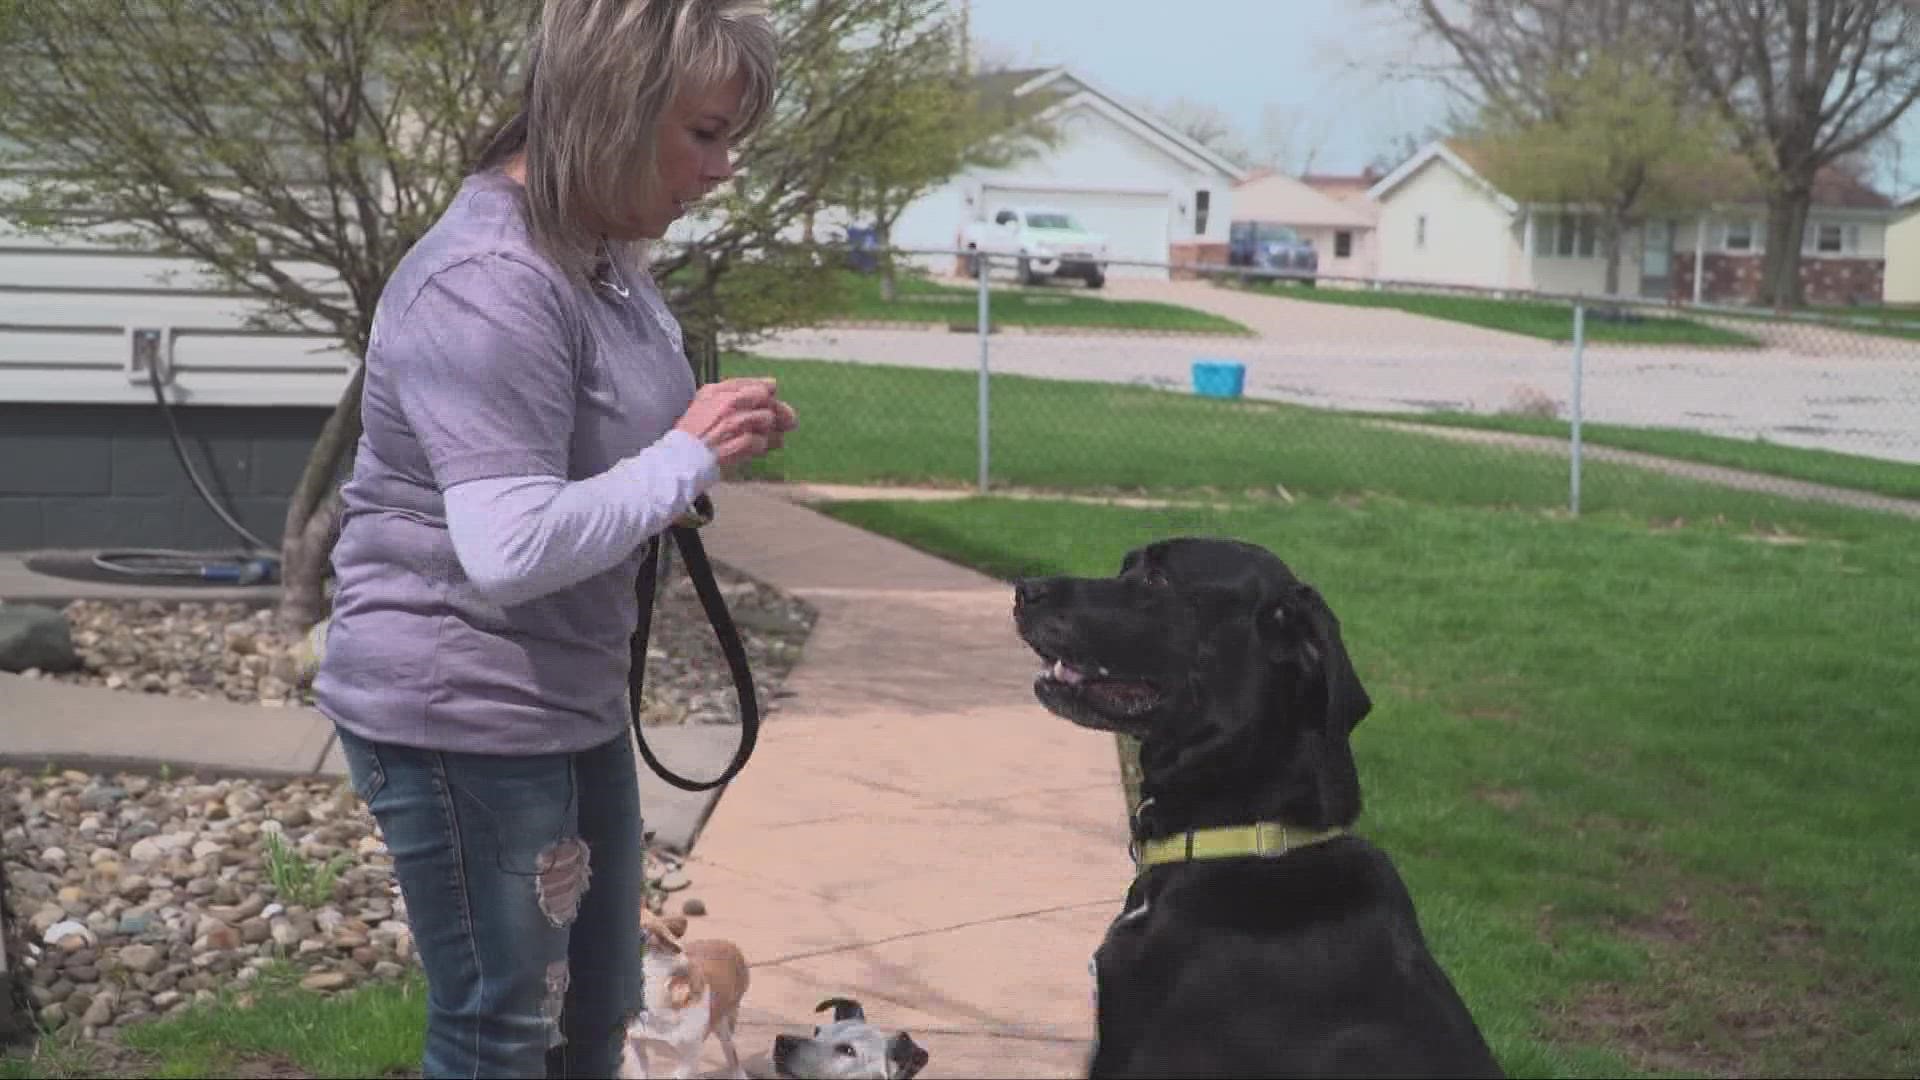 Non-profit Remi's Pet Recovery goes into action when runaway dogs don't come home.